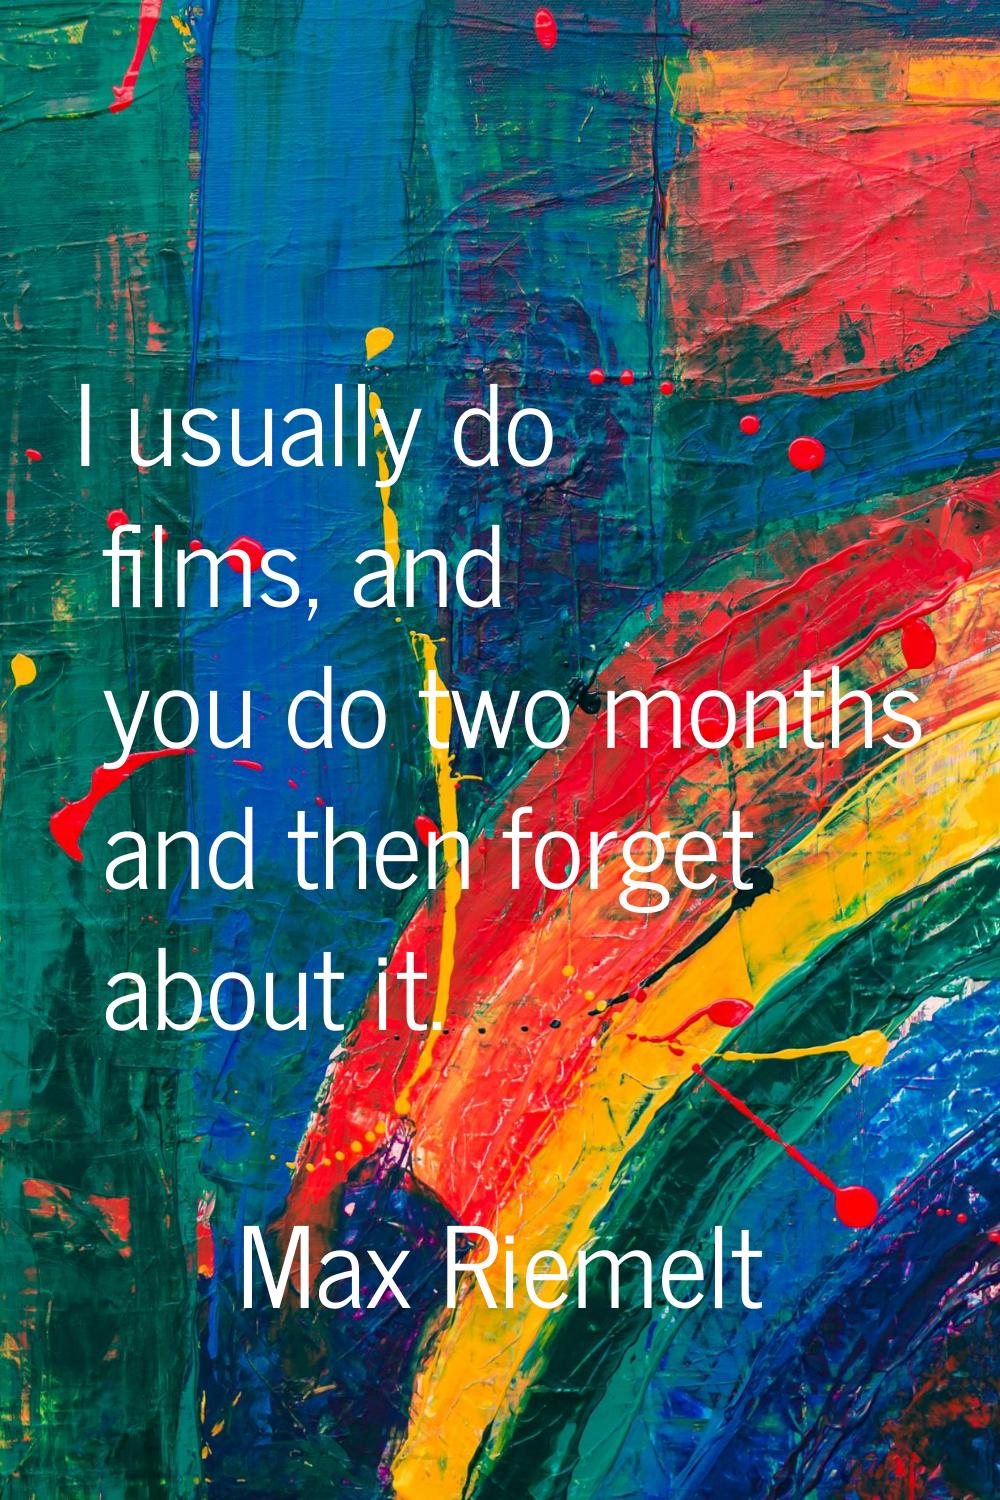 I usually do films, and you do two months and then forget about it.